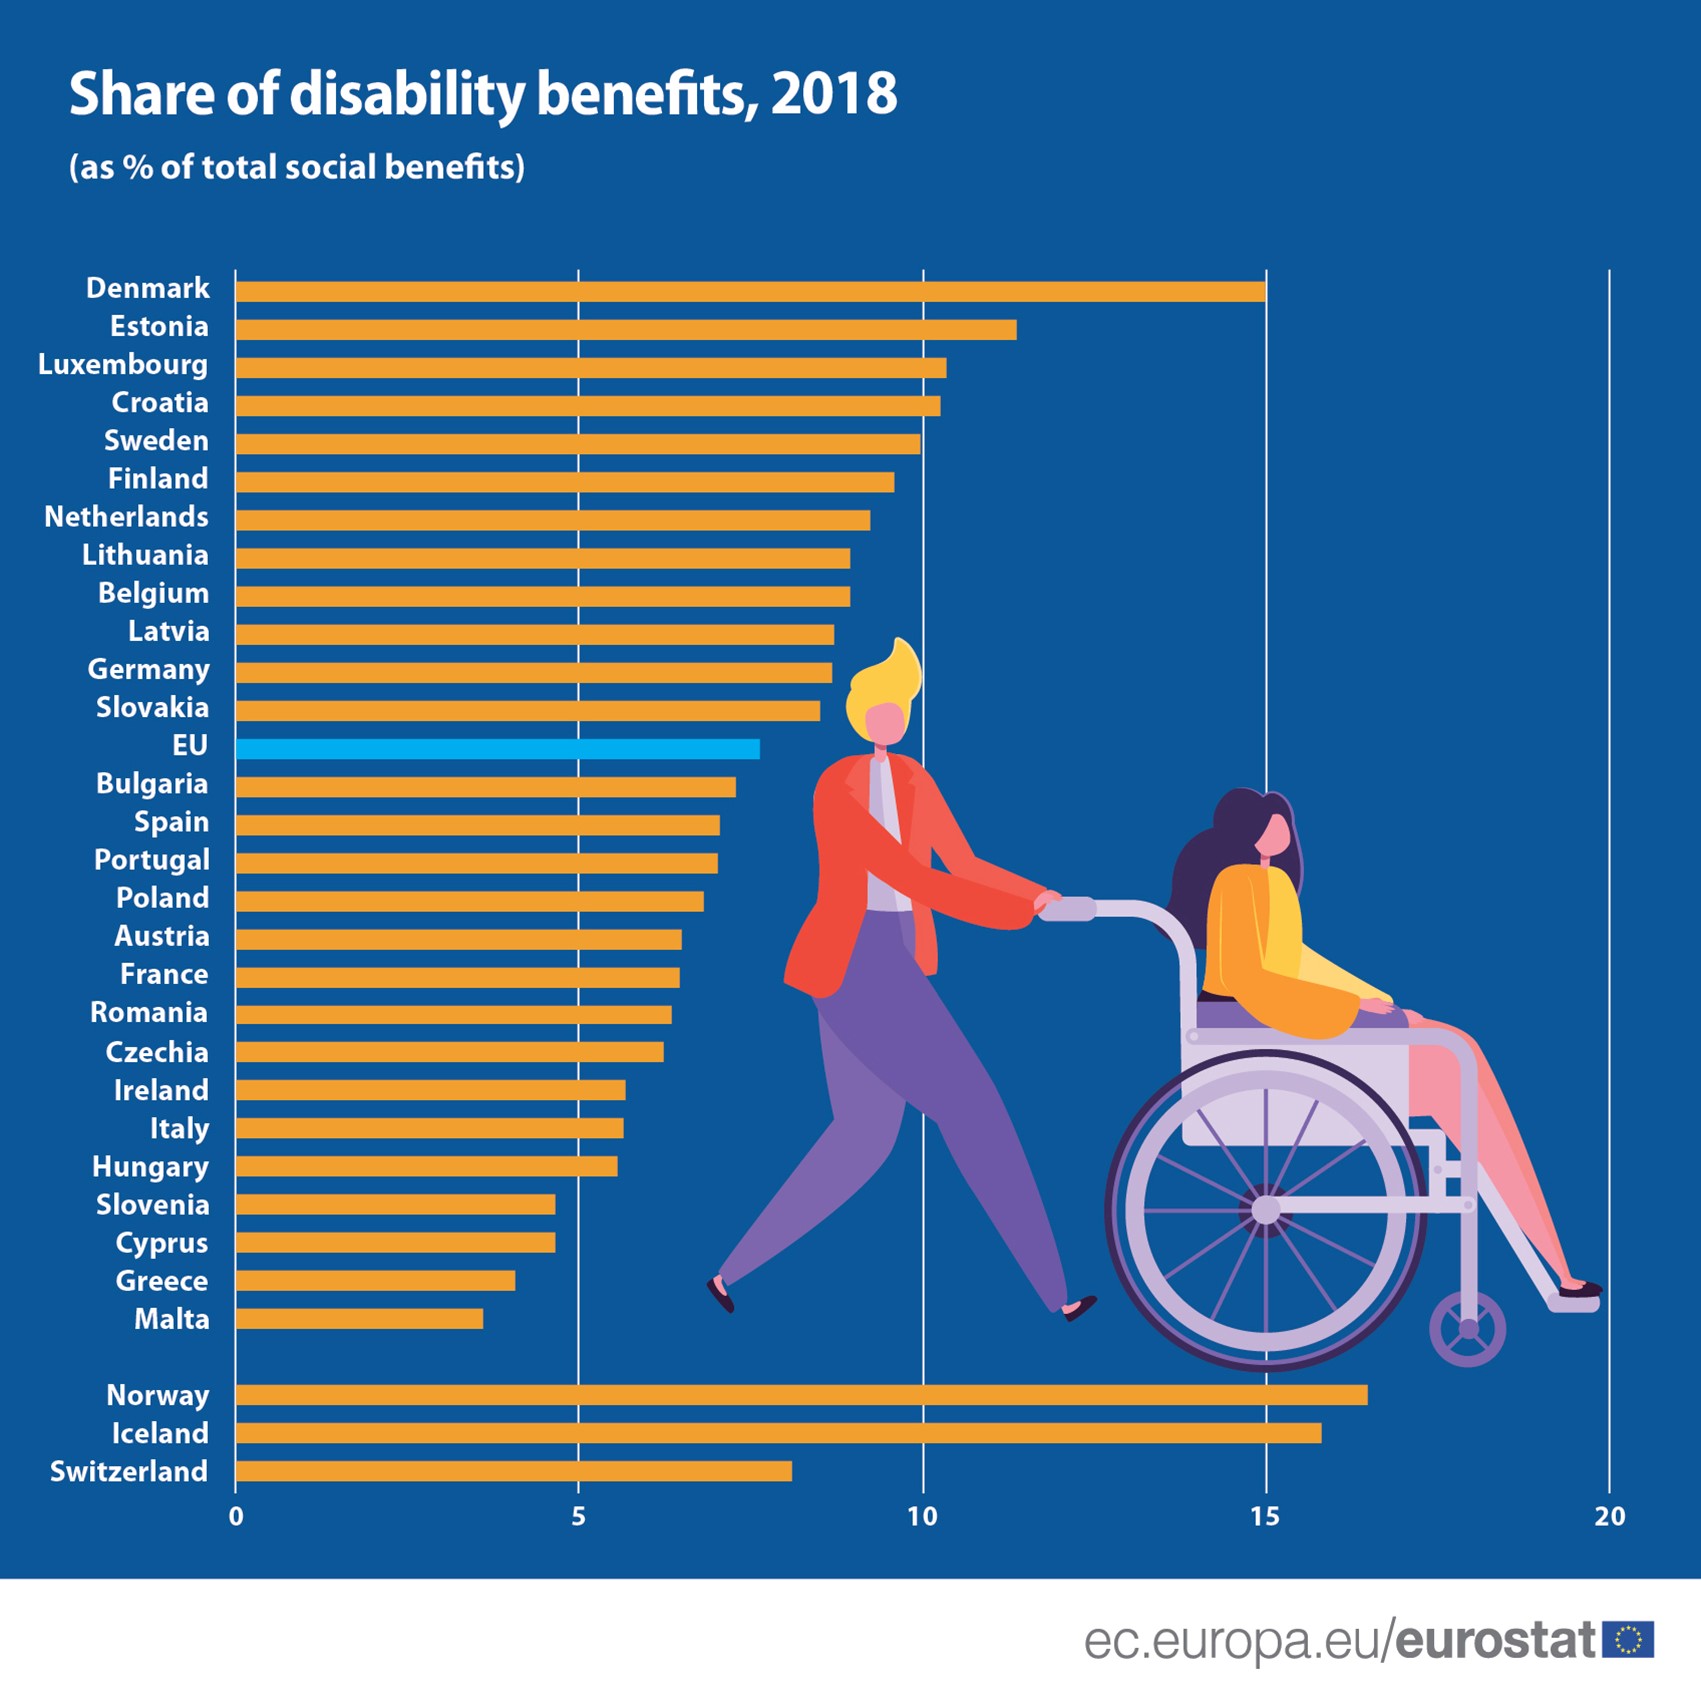 Share of disability benefits